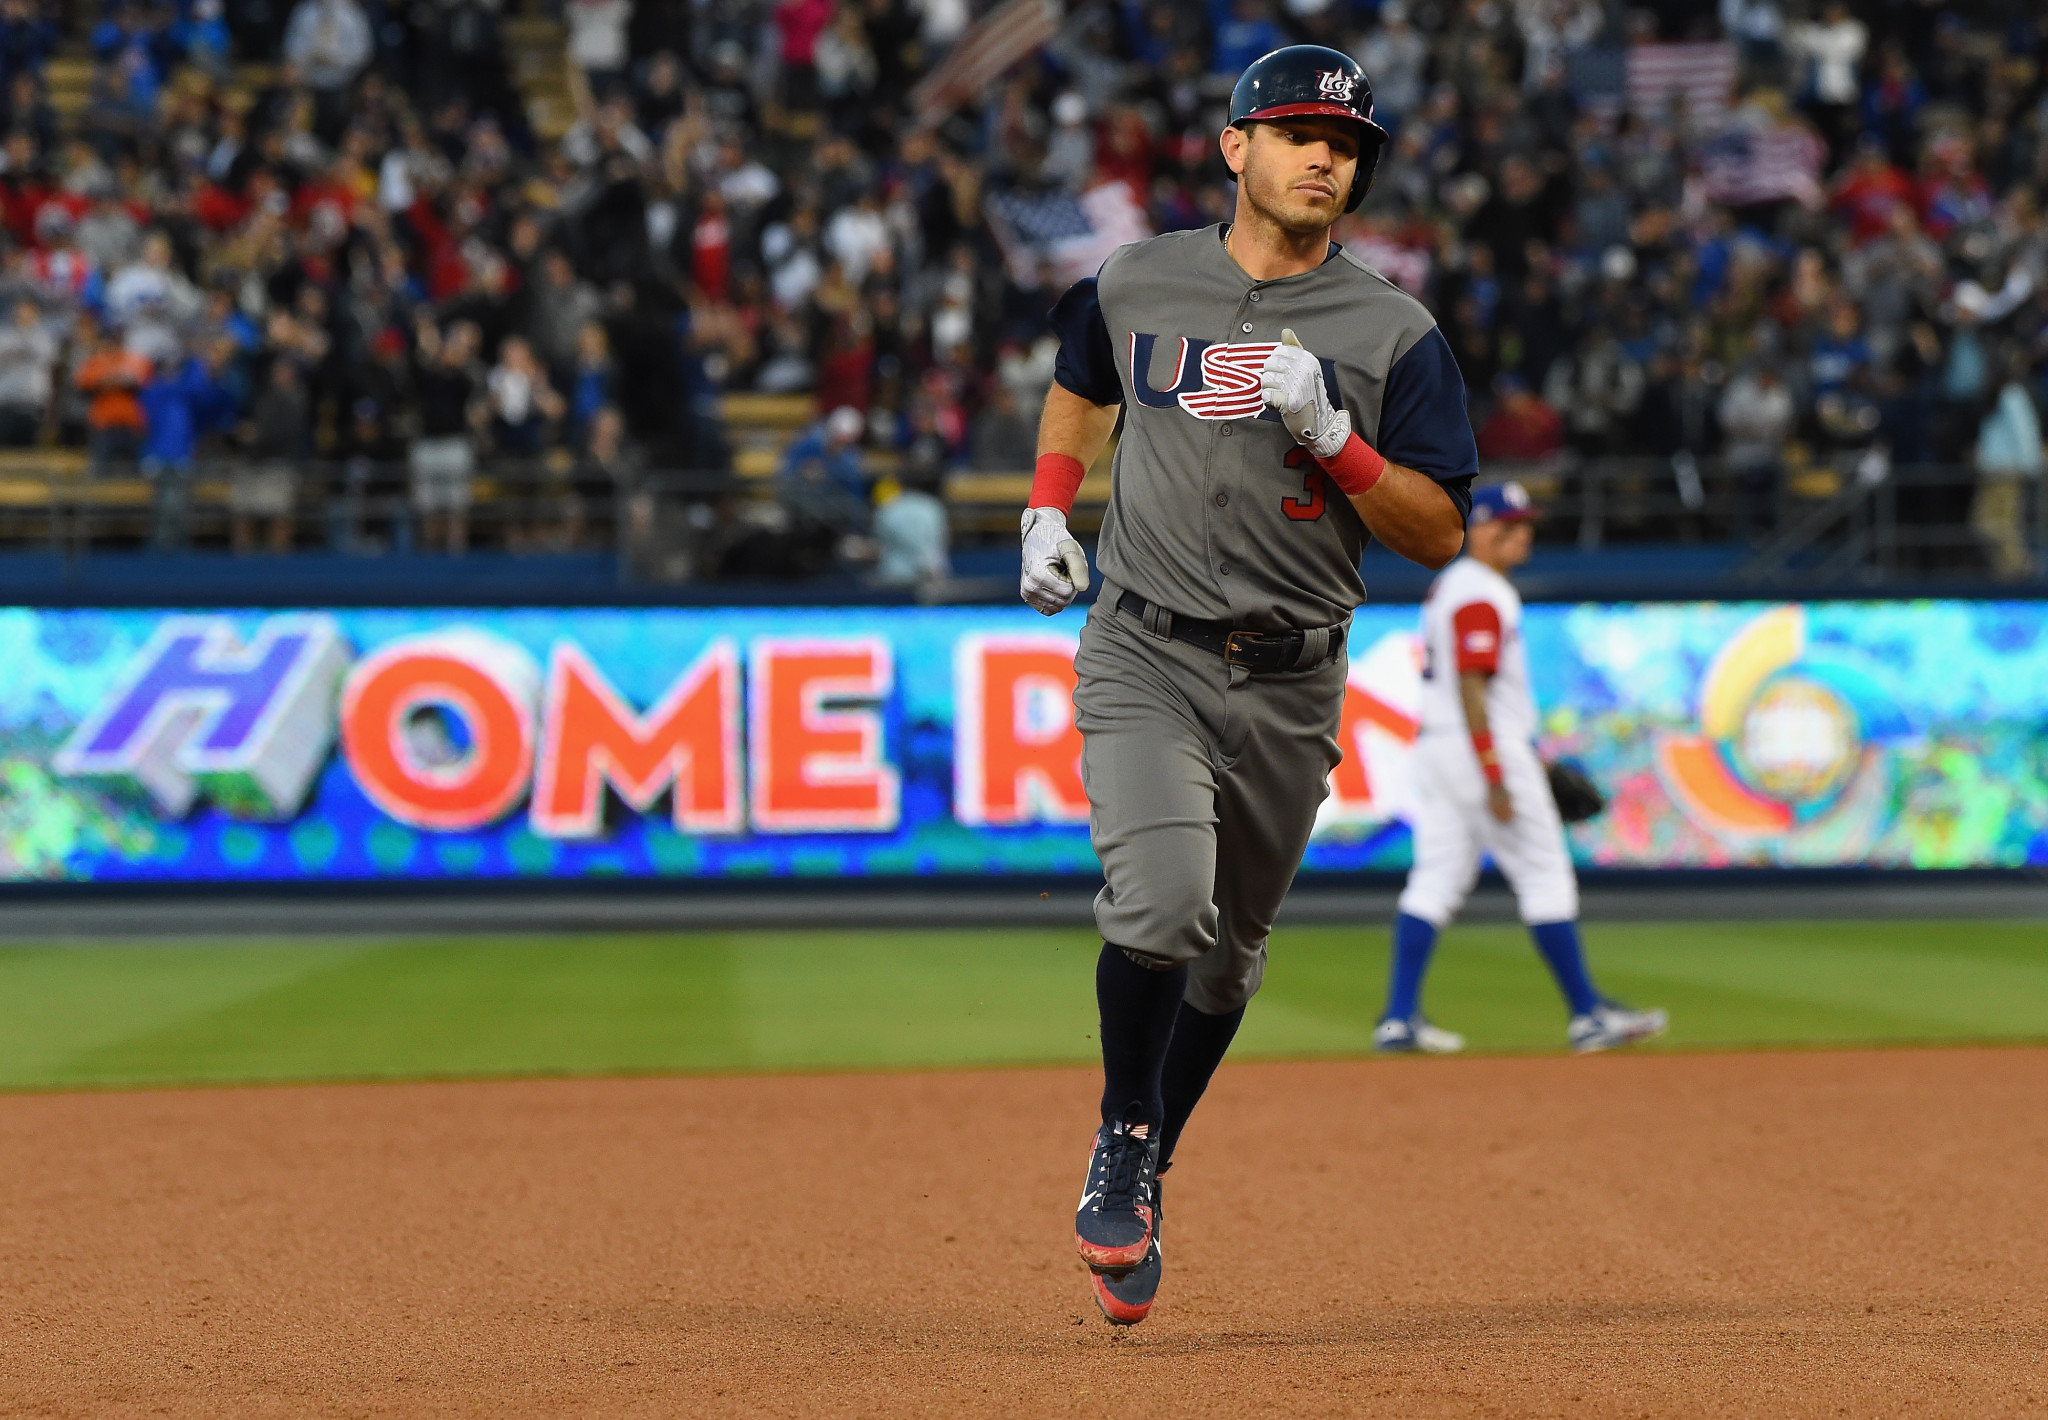 Ian Kinsler won the World Baseball Classic in 2017, playing for the United States ©Getty Images